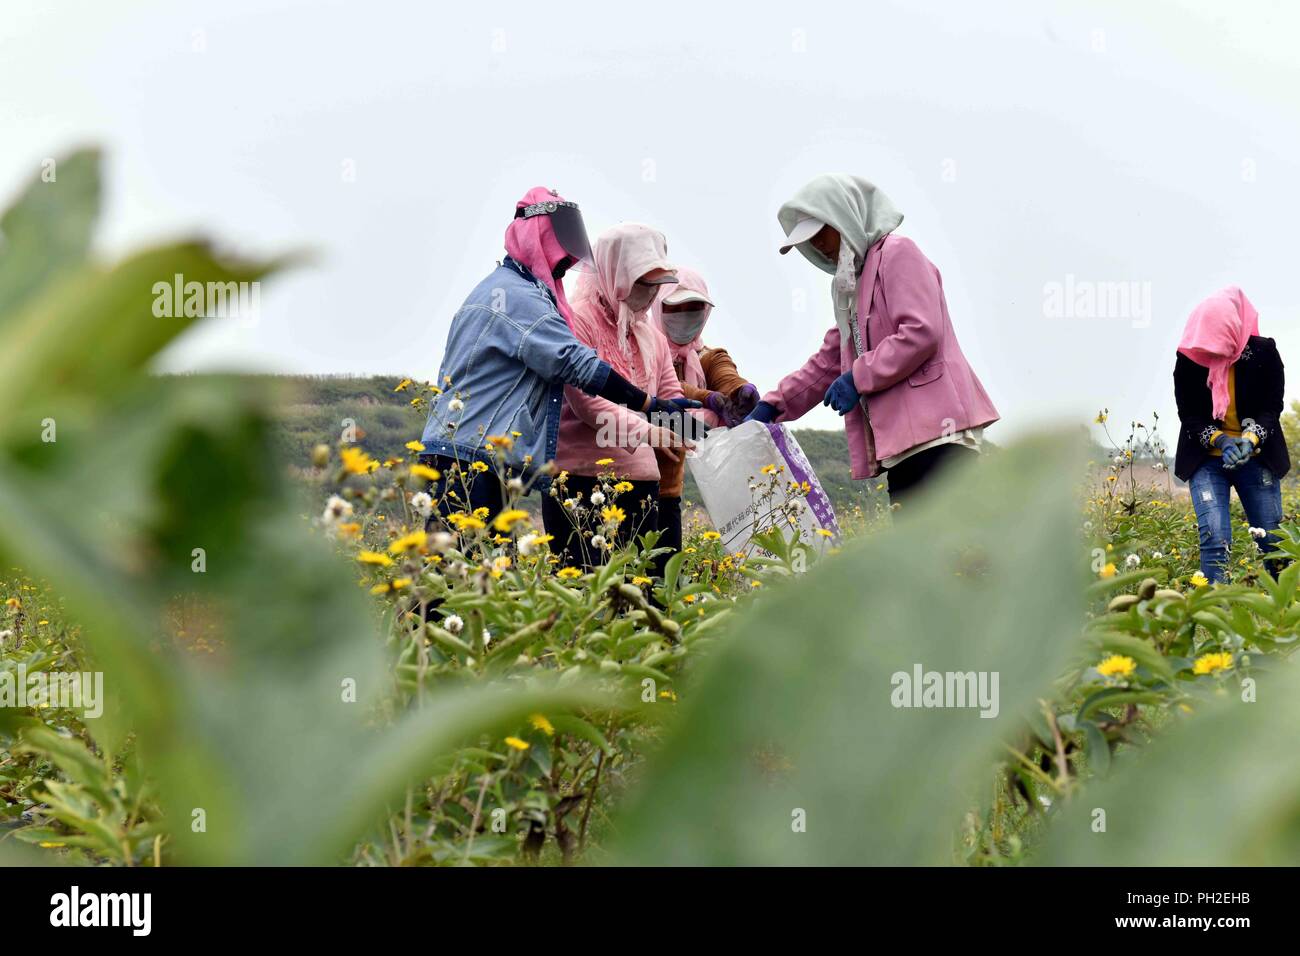 (180830) -- GUYUAN, Aug. 30, 2018 (Xinhua) -- Farmers pick peony flower seeds for oil manufacturing at a planting base in the Yuanzhou District of Guyuan City, northwest China's Ningxia Hui Autonomous Region, Aug. 28, 2018. Yuanzhou government started to cooperate with the peony seed oil company Ruidanyuan in 2014 to establish a peony planting base for processing and production of peony products on barren mountains. So far, the planting base has created over 300 job opportunities for impoverished locals and achieved sound improvements on environmental protection. (Xinhua/Guo Xulei) (hxy) Stock Photo